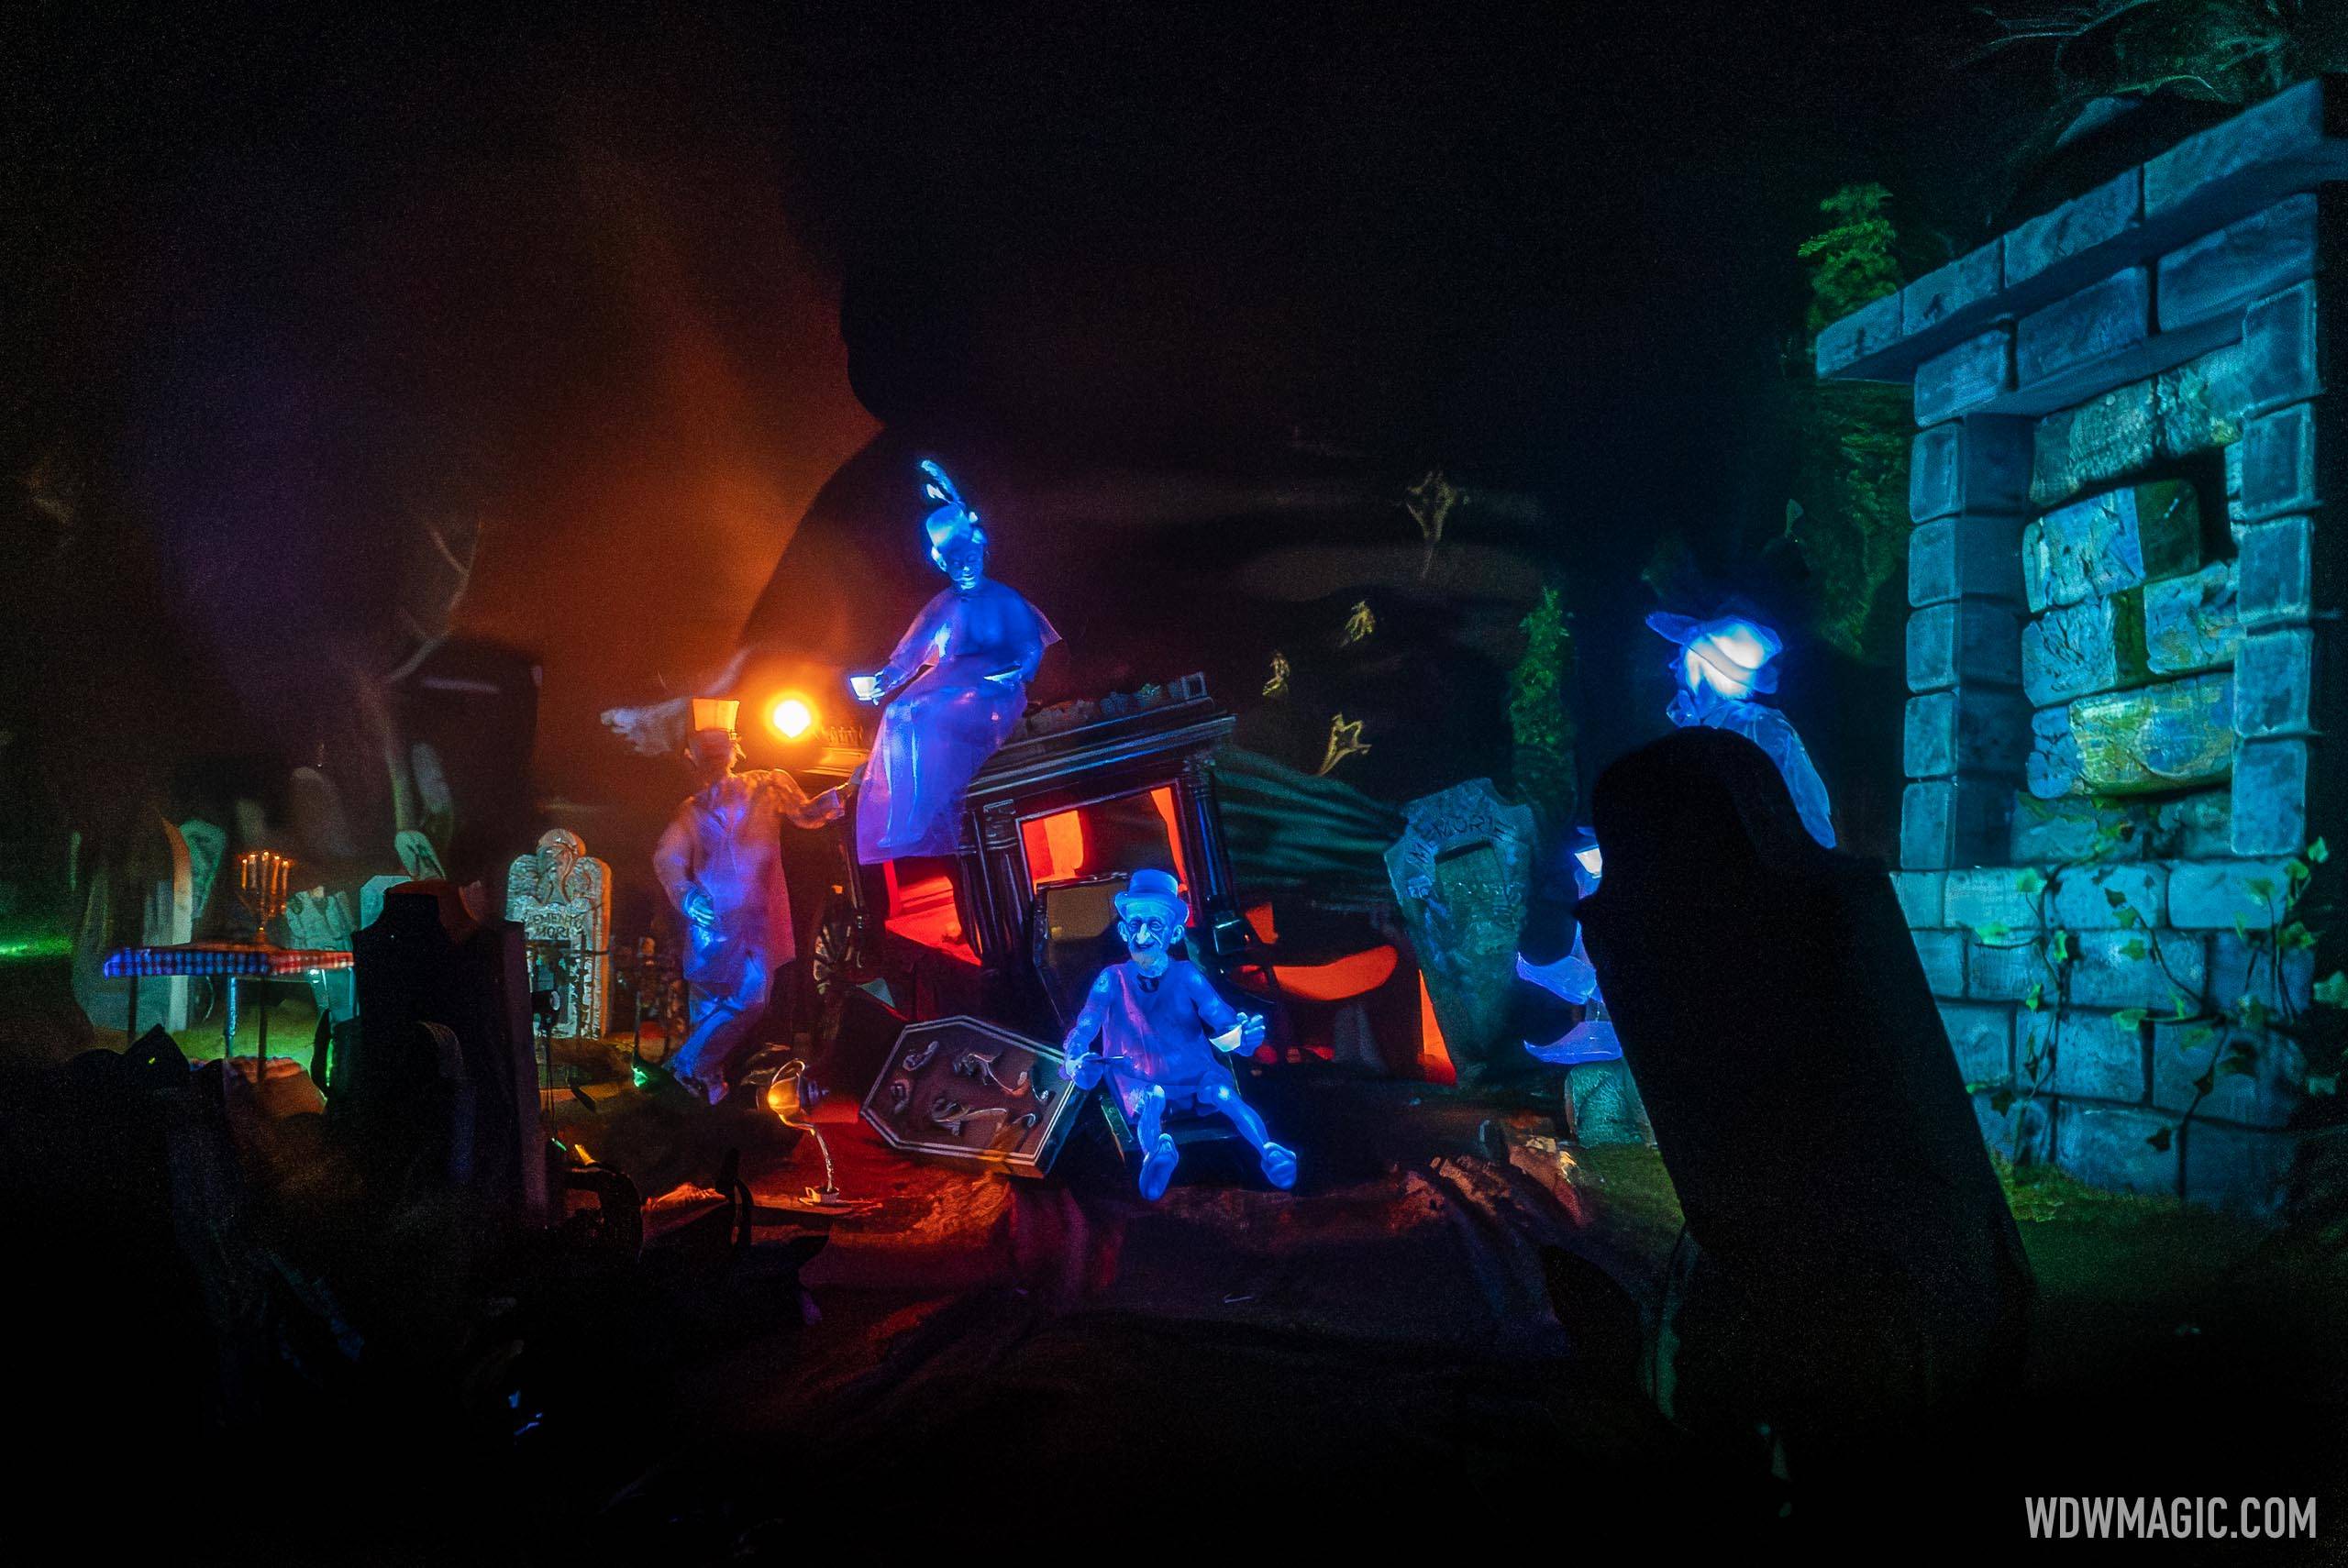 Renovated Haunted Mansion reopens at Magic Kingdom: What's Changed?